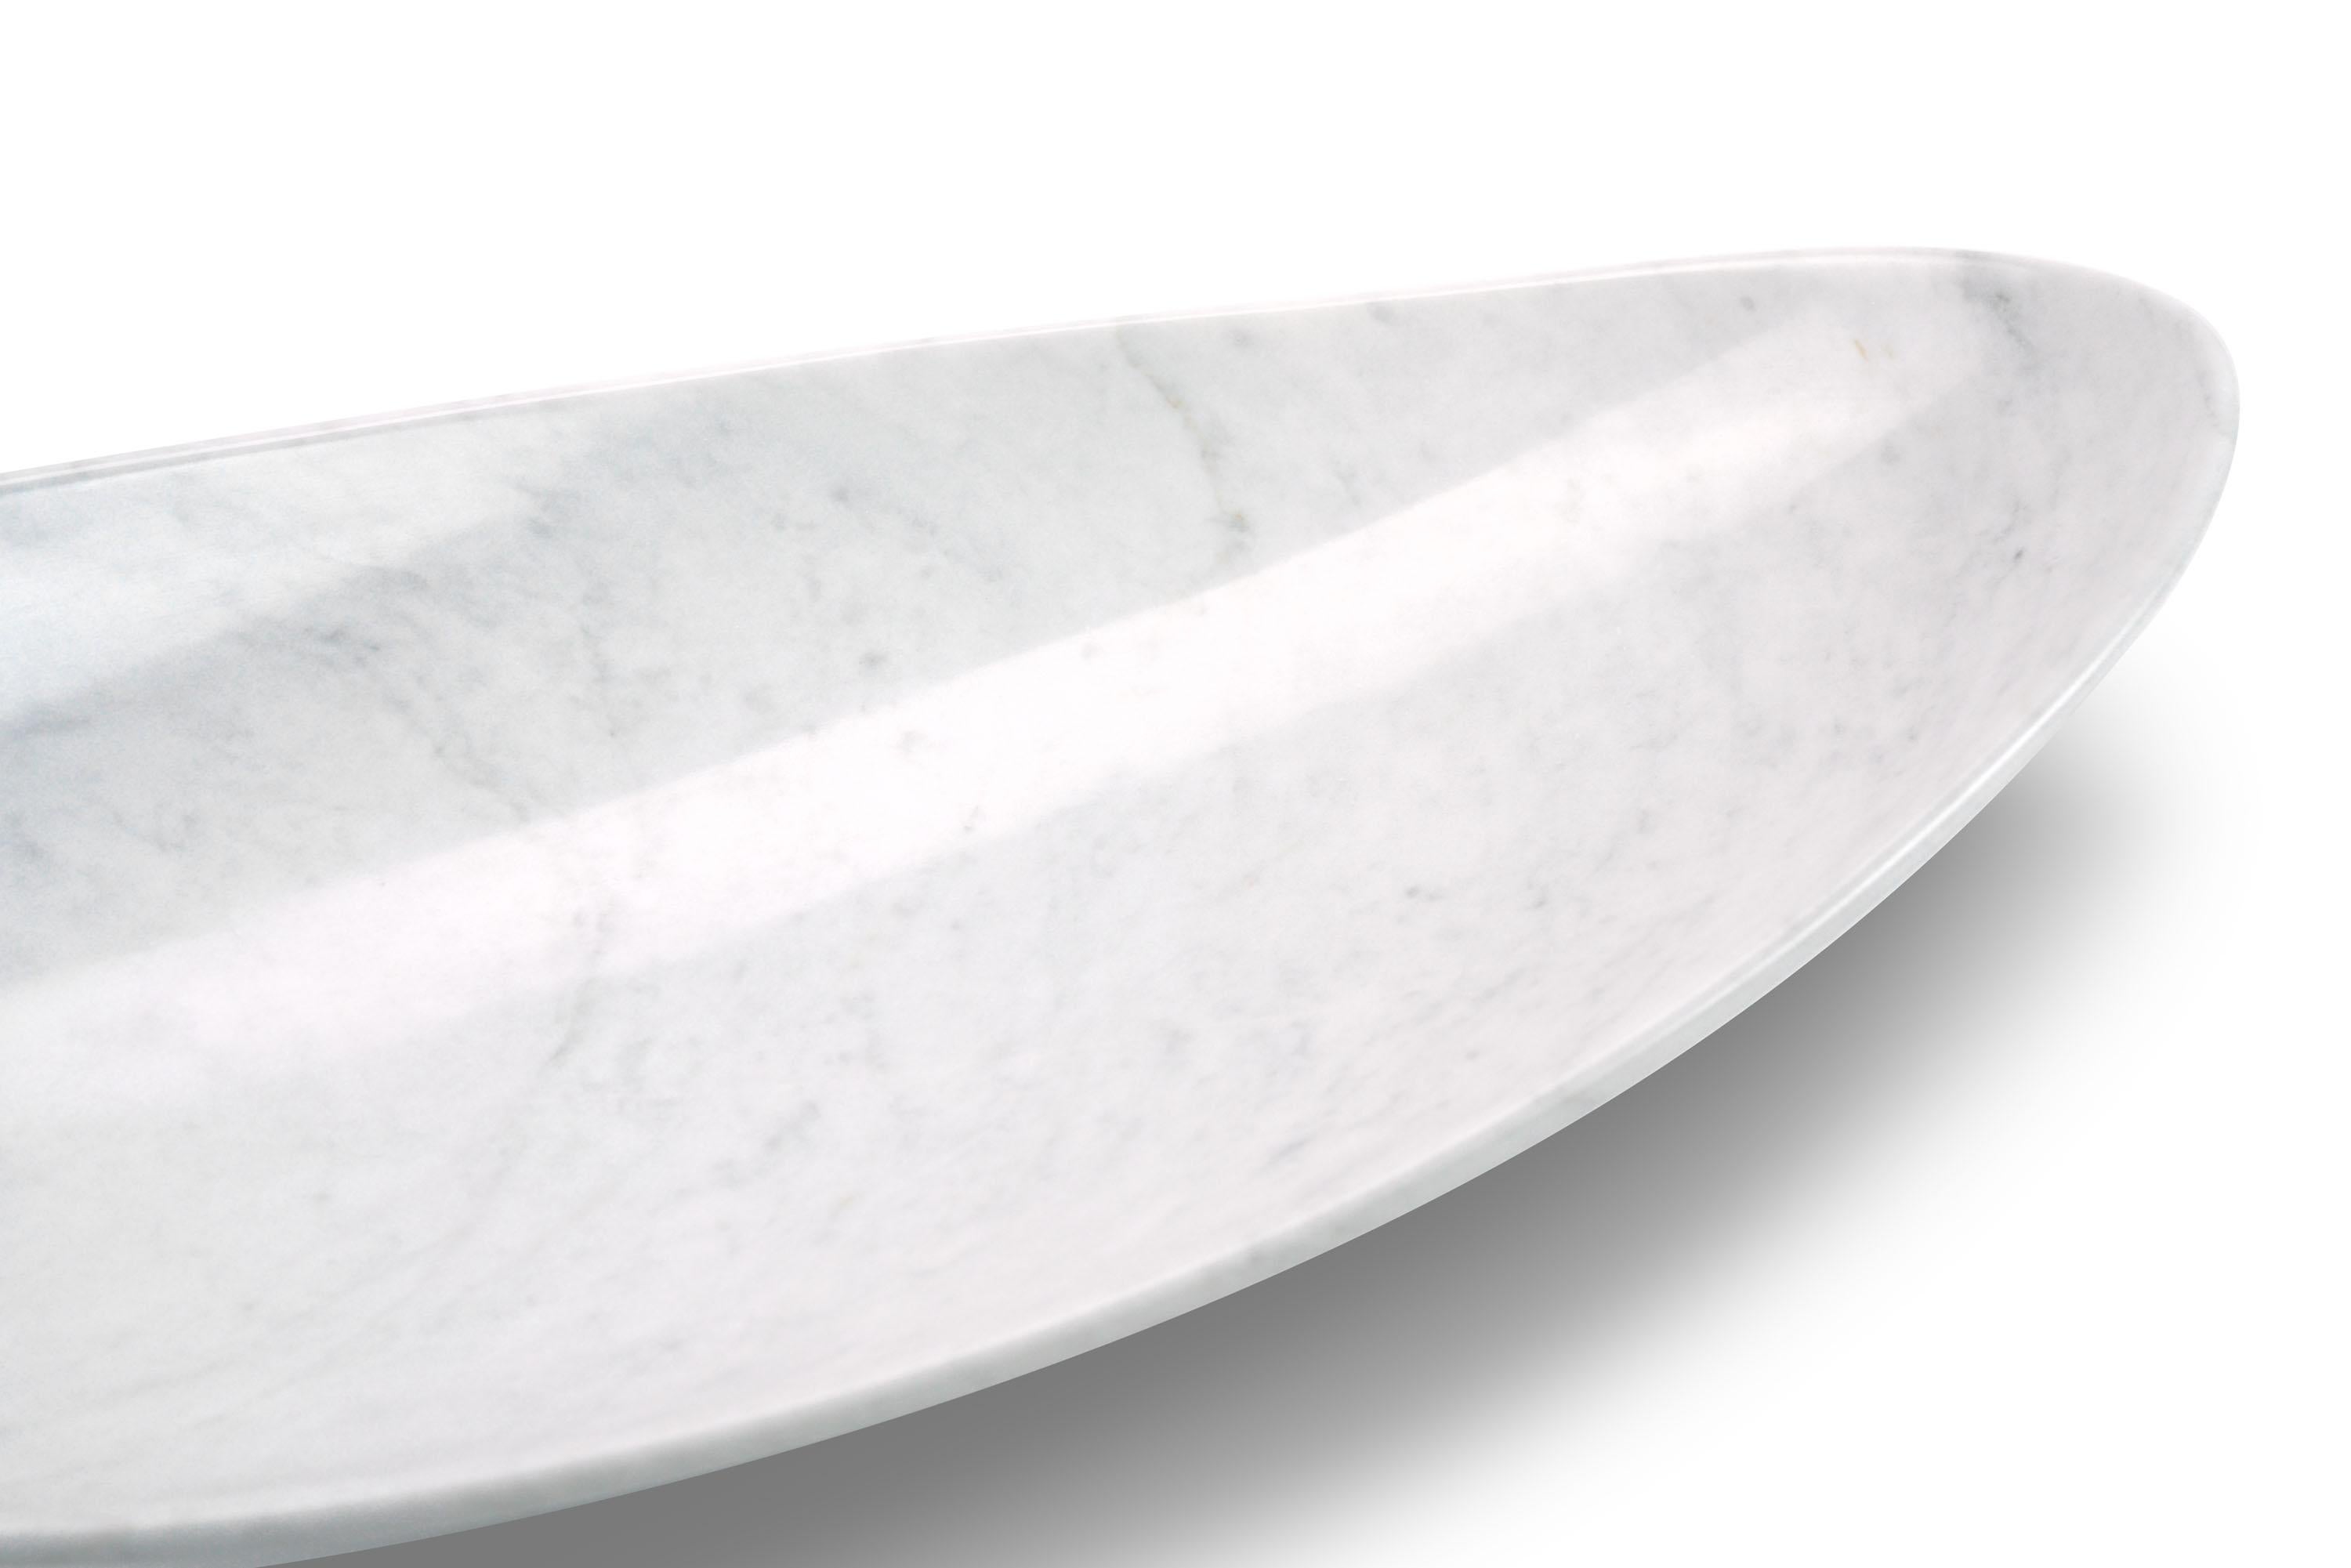 Bowl sculpted by hand from a solid block of white Carrara marble. Polish finishing. 

Dimensions: Big L 56 x  W 27 x  H 12 cm. 
Also availabe: Medium L 45 x W 22 x H 10 cm, Small L 35 x  W 17 x H 8 cm.
Available in different marbles, onyx and